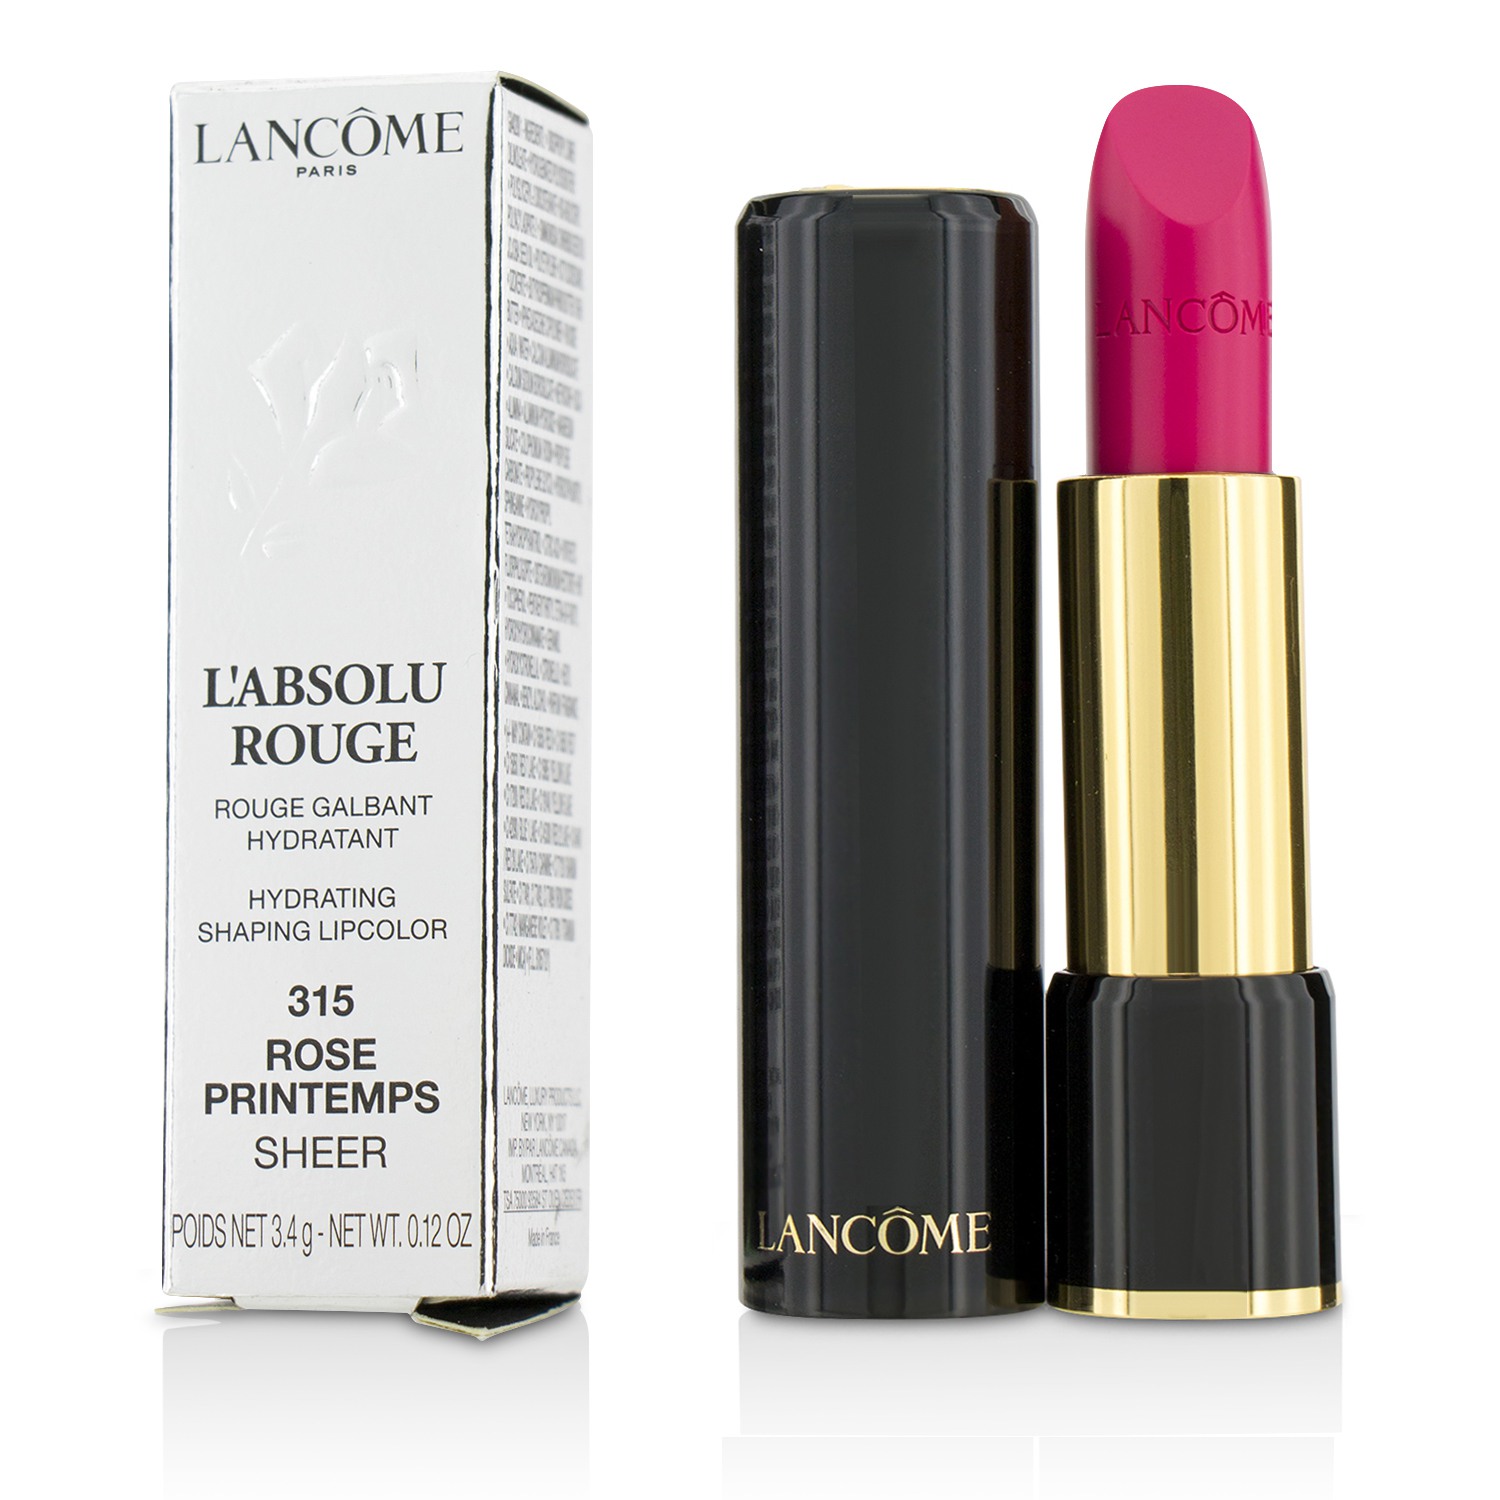 L Absolu Rouge Hydrating Shaping Lipcolor - # 315 Rose Printemps (Sheer) Lancome Image